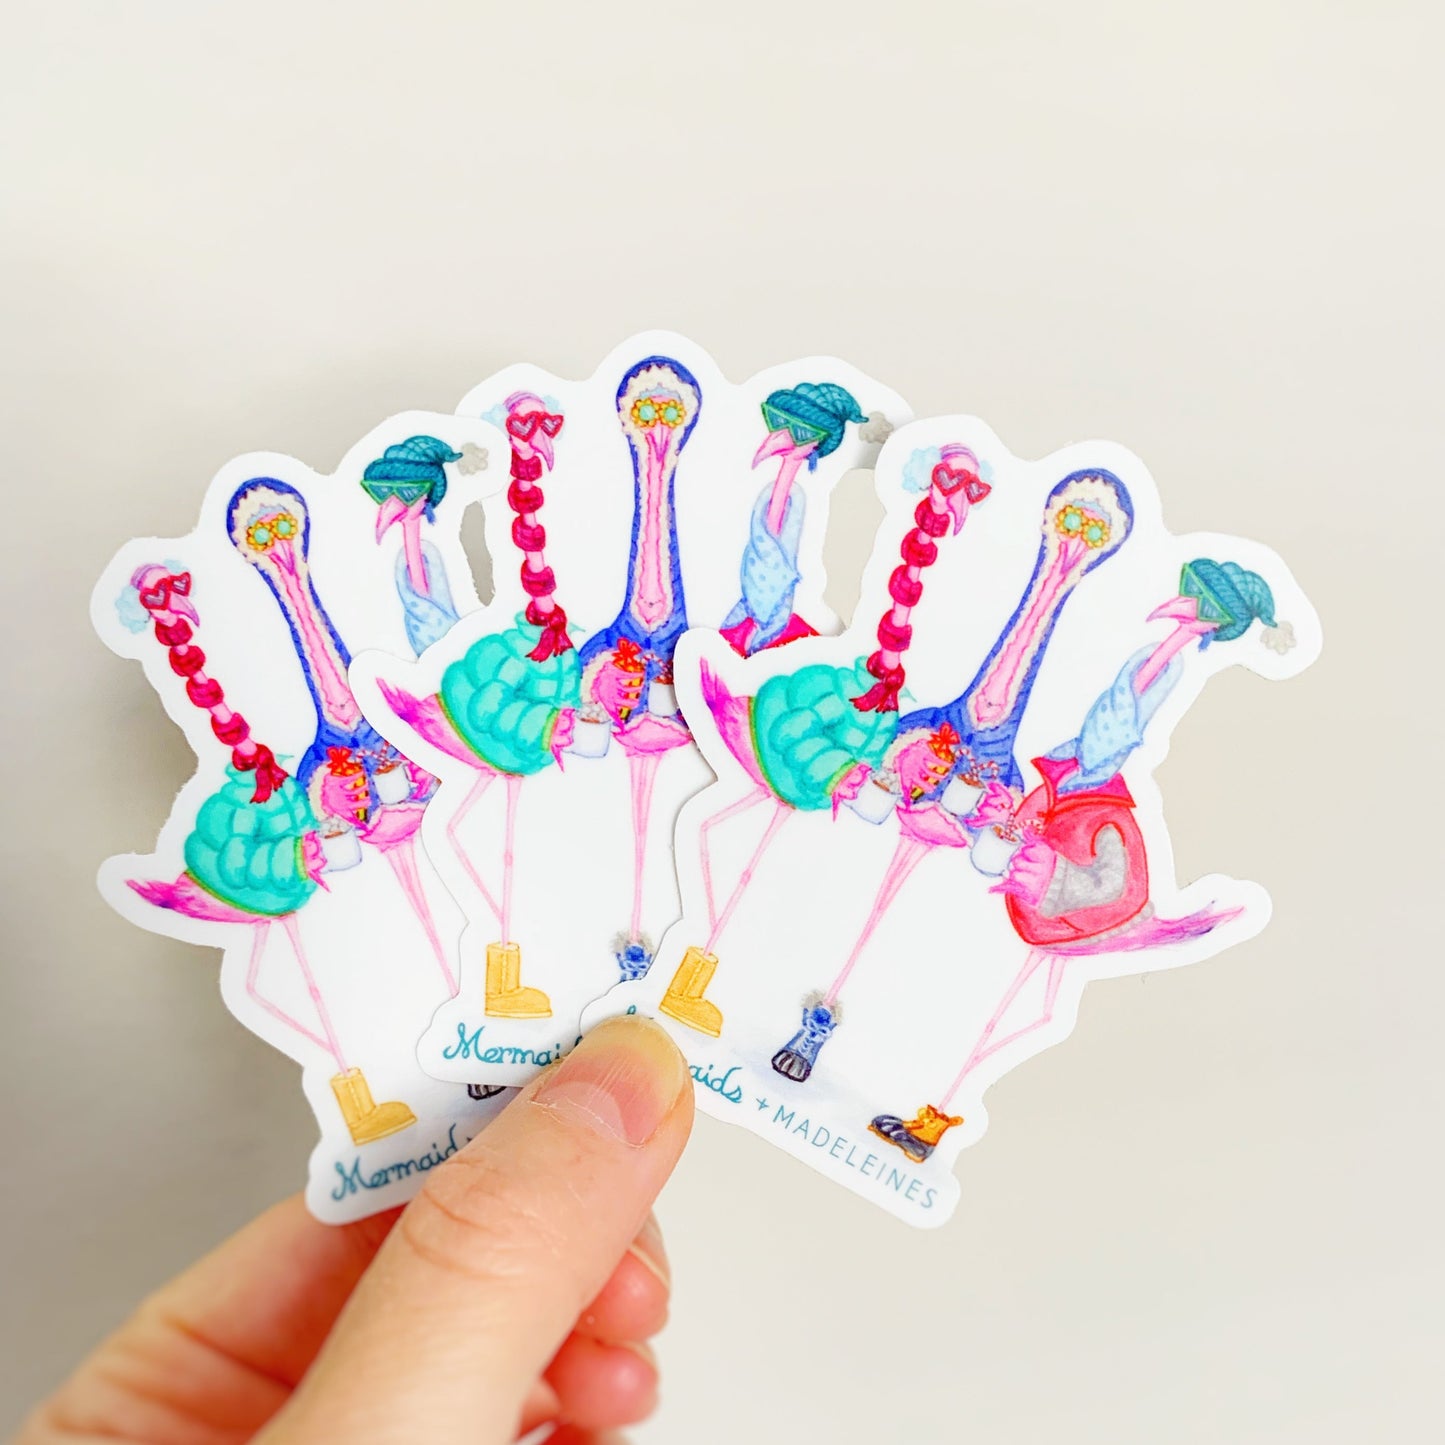 this is a photograph of 3 vinyl stickers held up and fanned out in a hand with a white background. the stickers are illustrations of 3 flamingos dressed in winter wear and designed by mermaids and madeleines